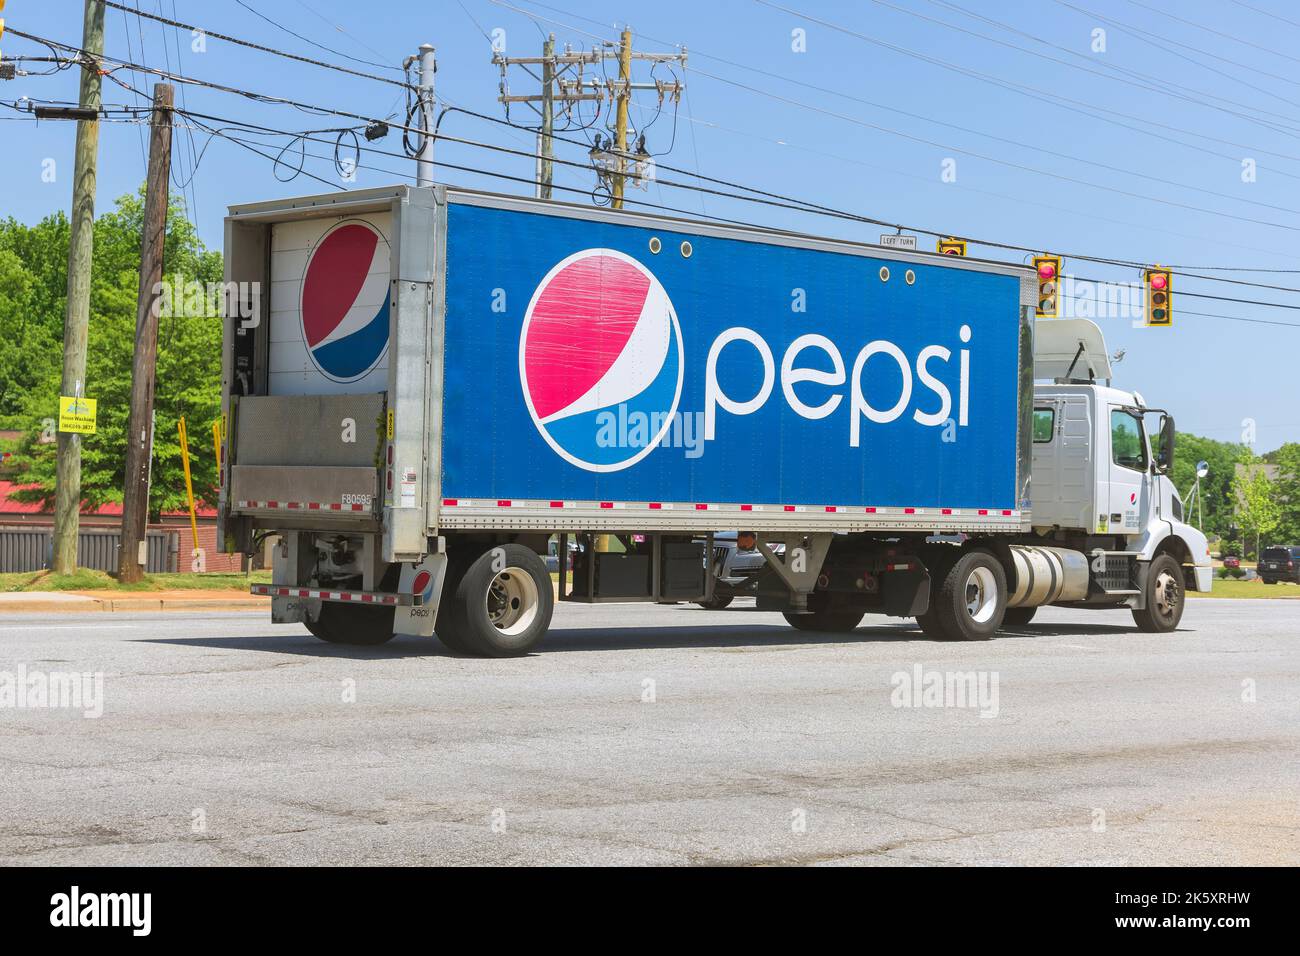 20 September 22 Greenville SC US During delivery of Pepsis products at local convenience store, there is Pepsi truck. As multinational beverage company, Pepsi is an American company Stock Photo